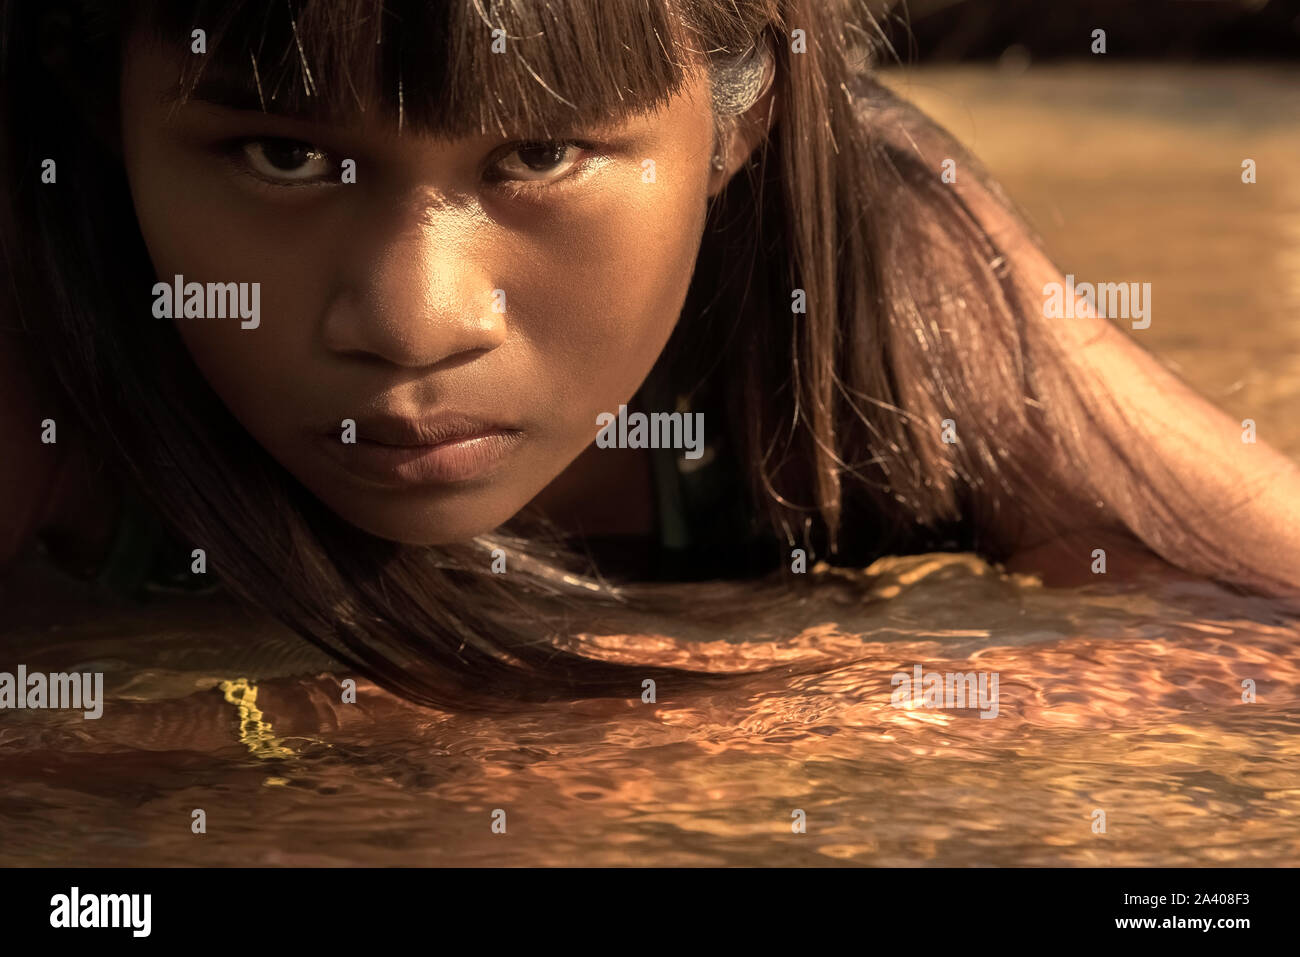 Natividade, Tocantins, Brazil - May 09, 2016: Indigenous Brazilian girl from Tocantins State laying on the river waters Stock Photo